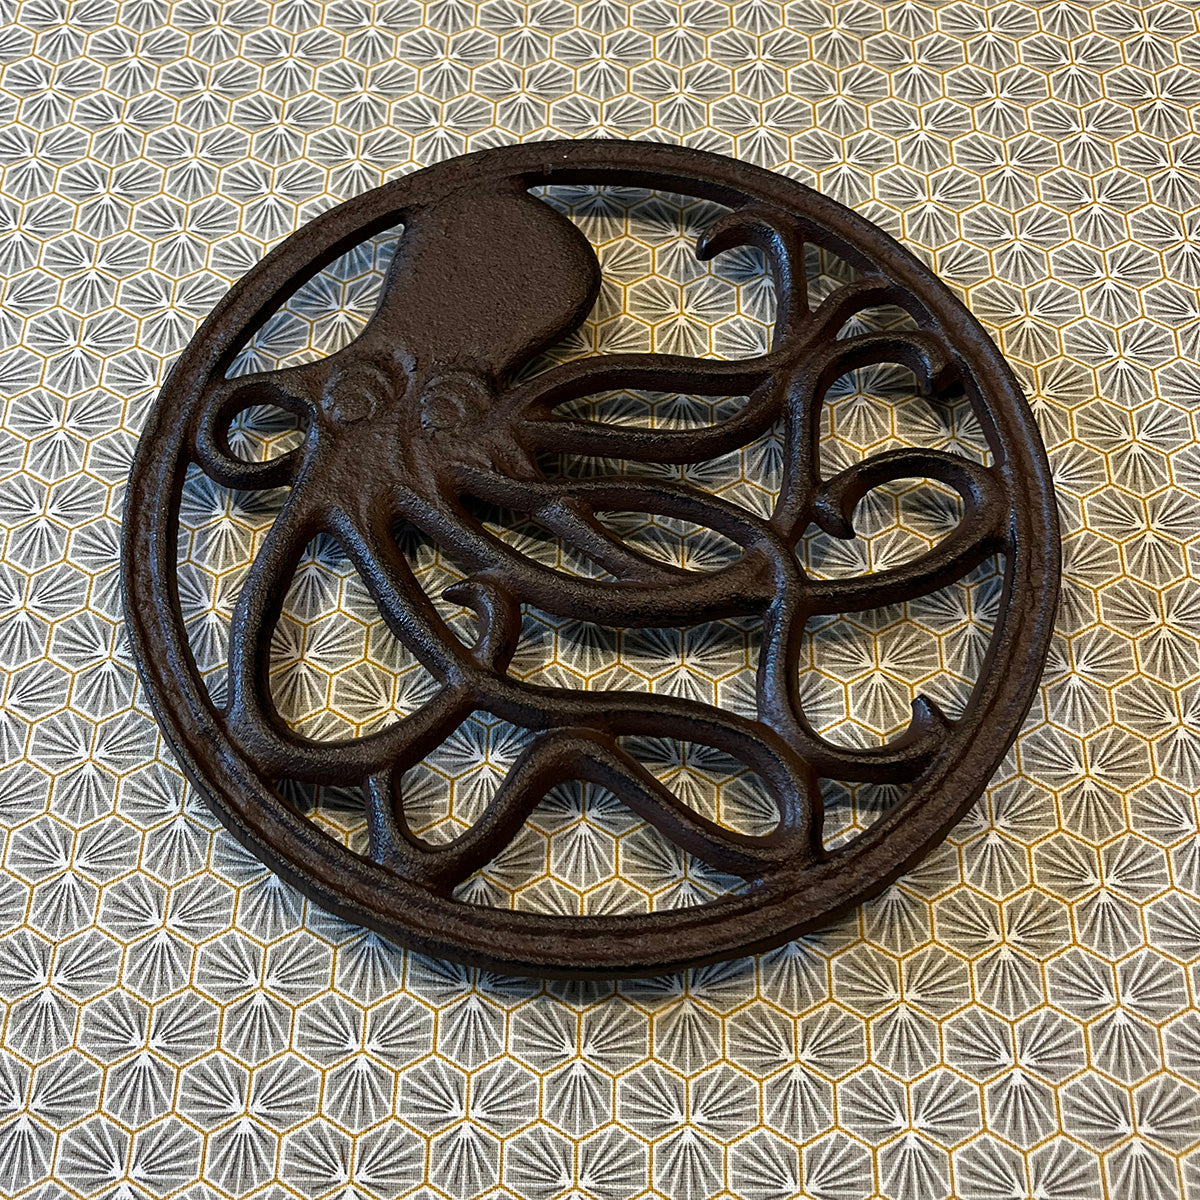 Cast Iron Round Octopus Themed Table Trivet (Pack of 2)